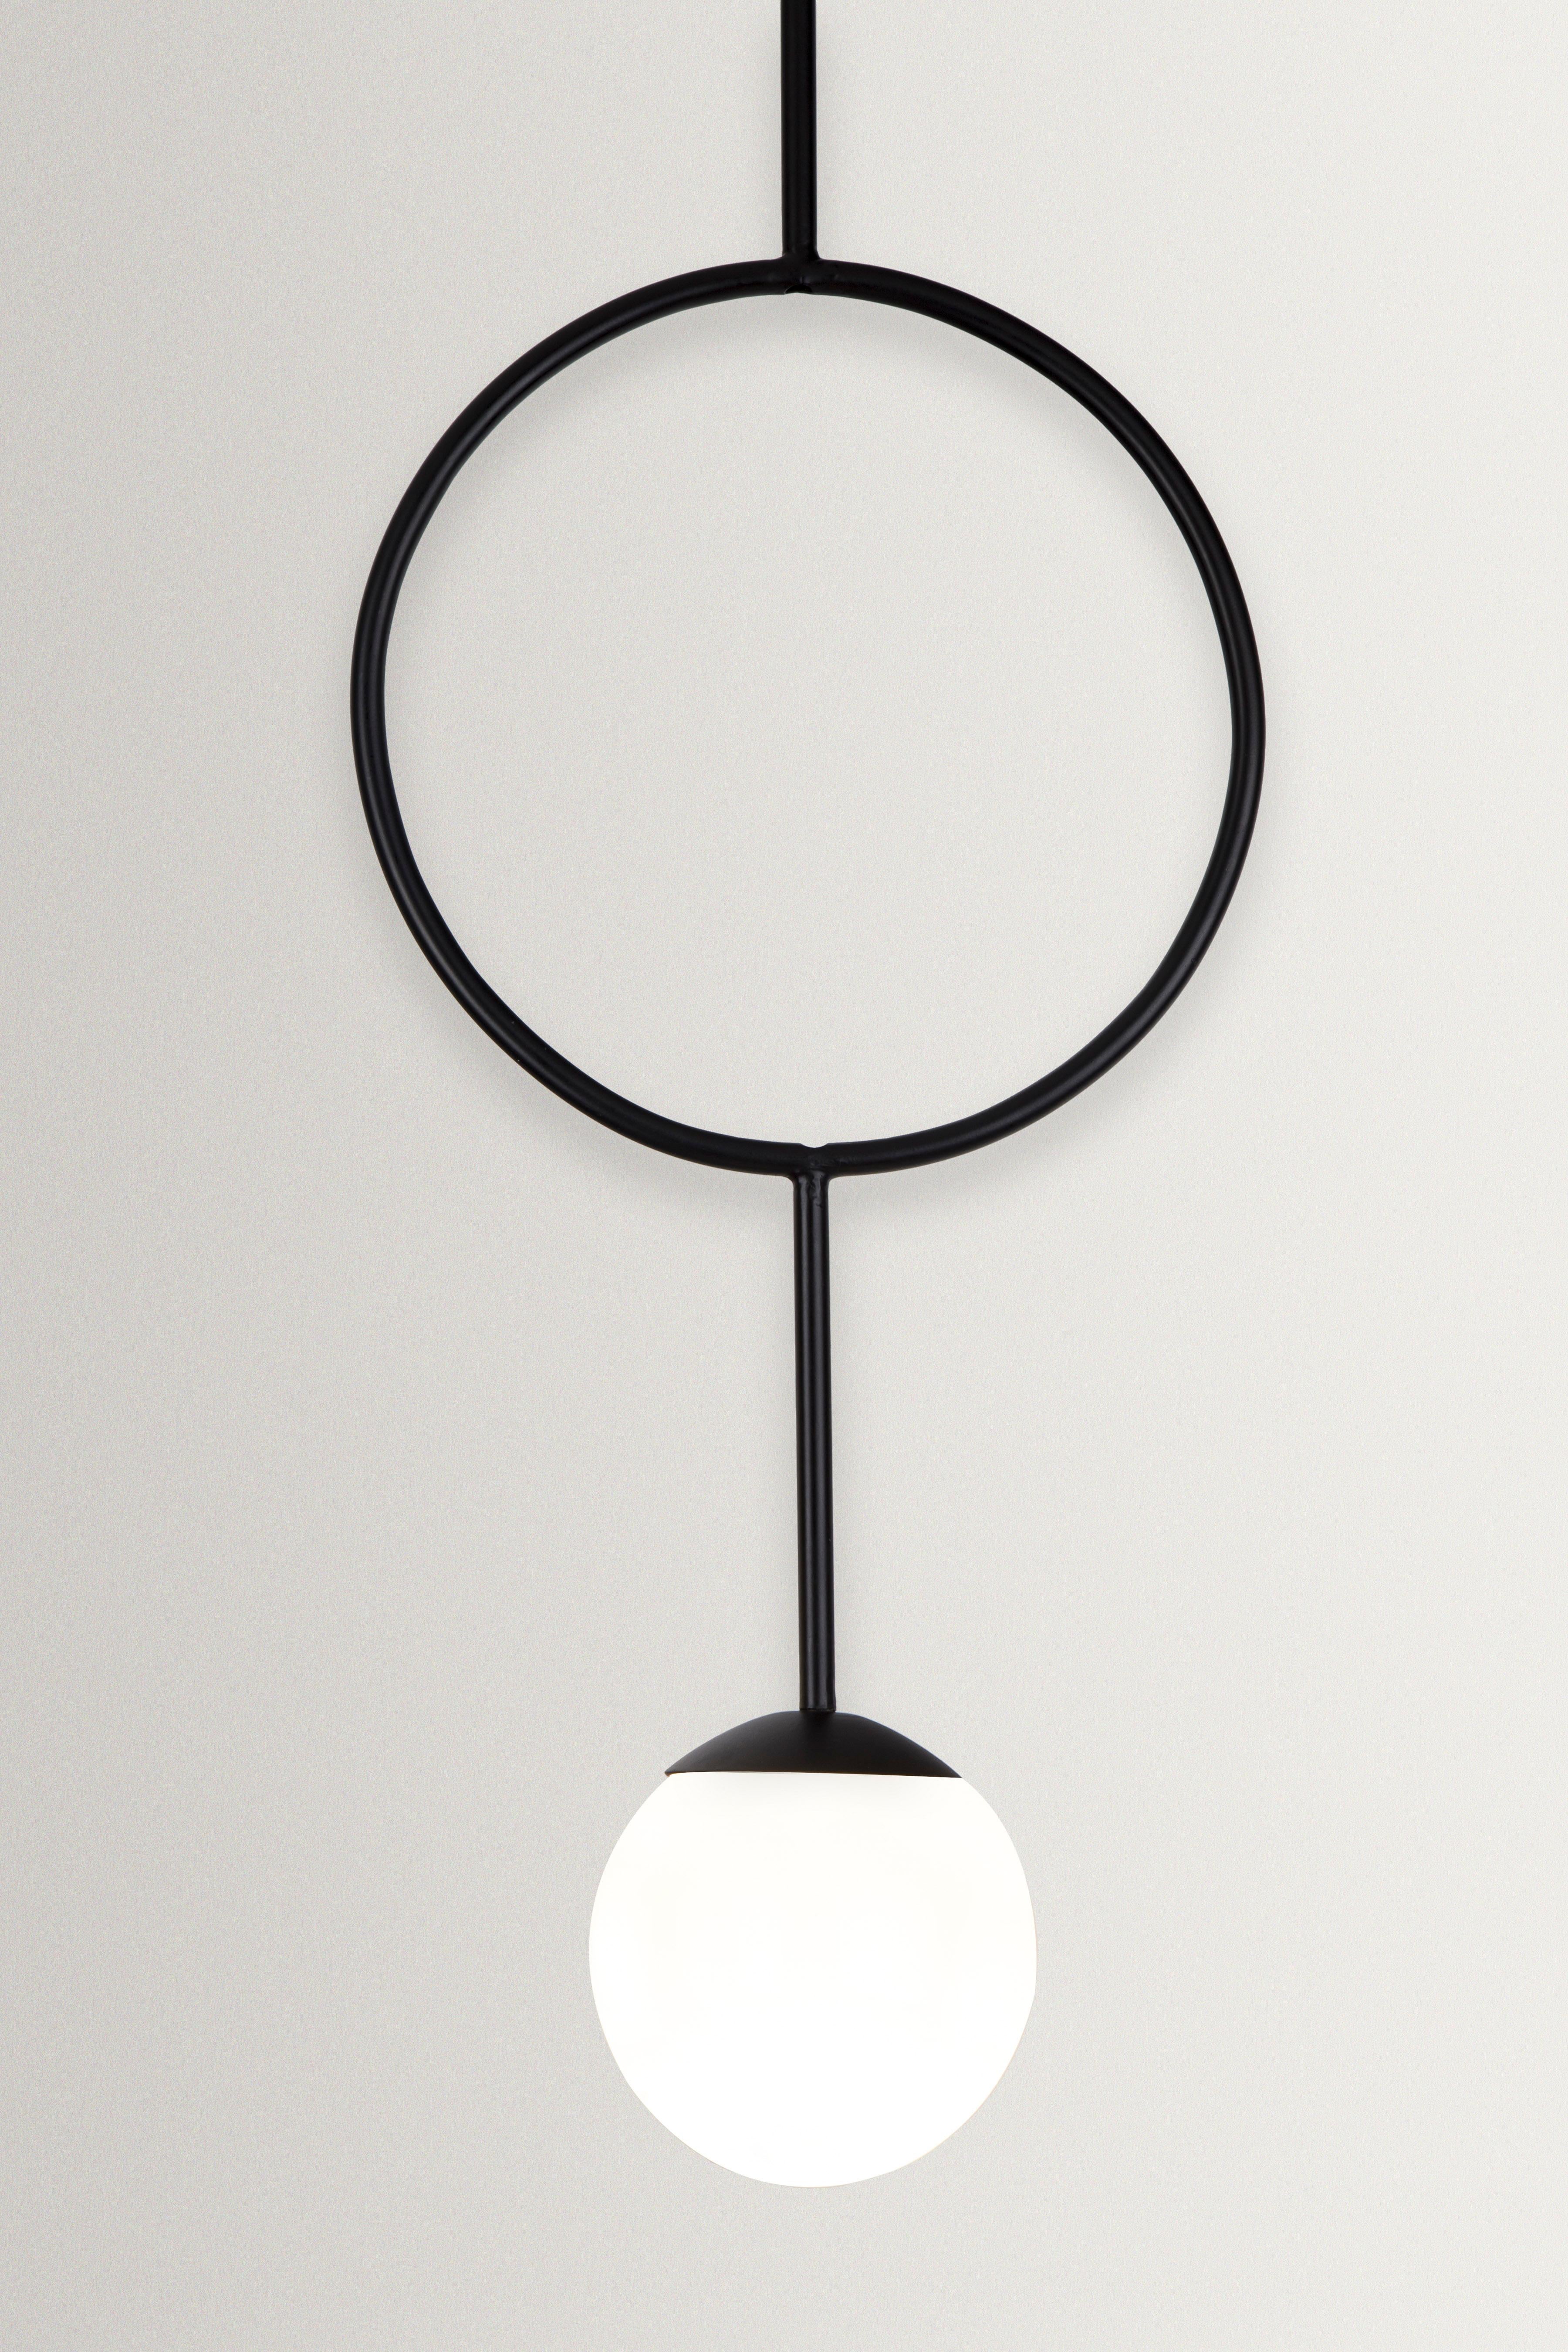 Unique Esferra ring pendant by Hatsu
Dimensions: W 25 x H 65 cm 
Materials: Opal glass with powder coated aluminium

Hatsu is a design studio based in Mumbai that creates modern lighting that are unique and immediately recognisable. We started